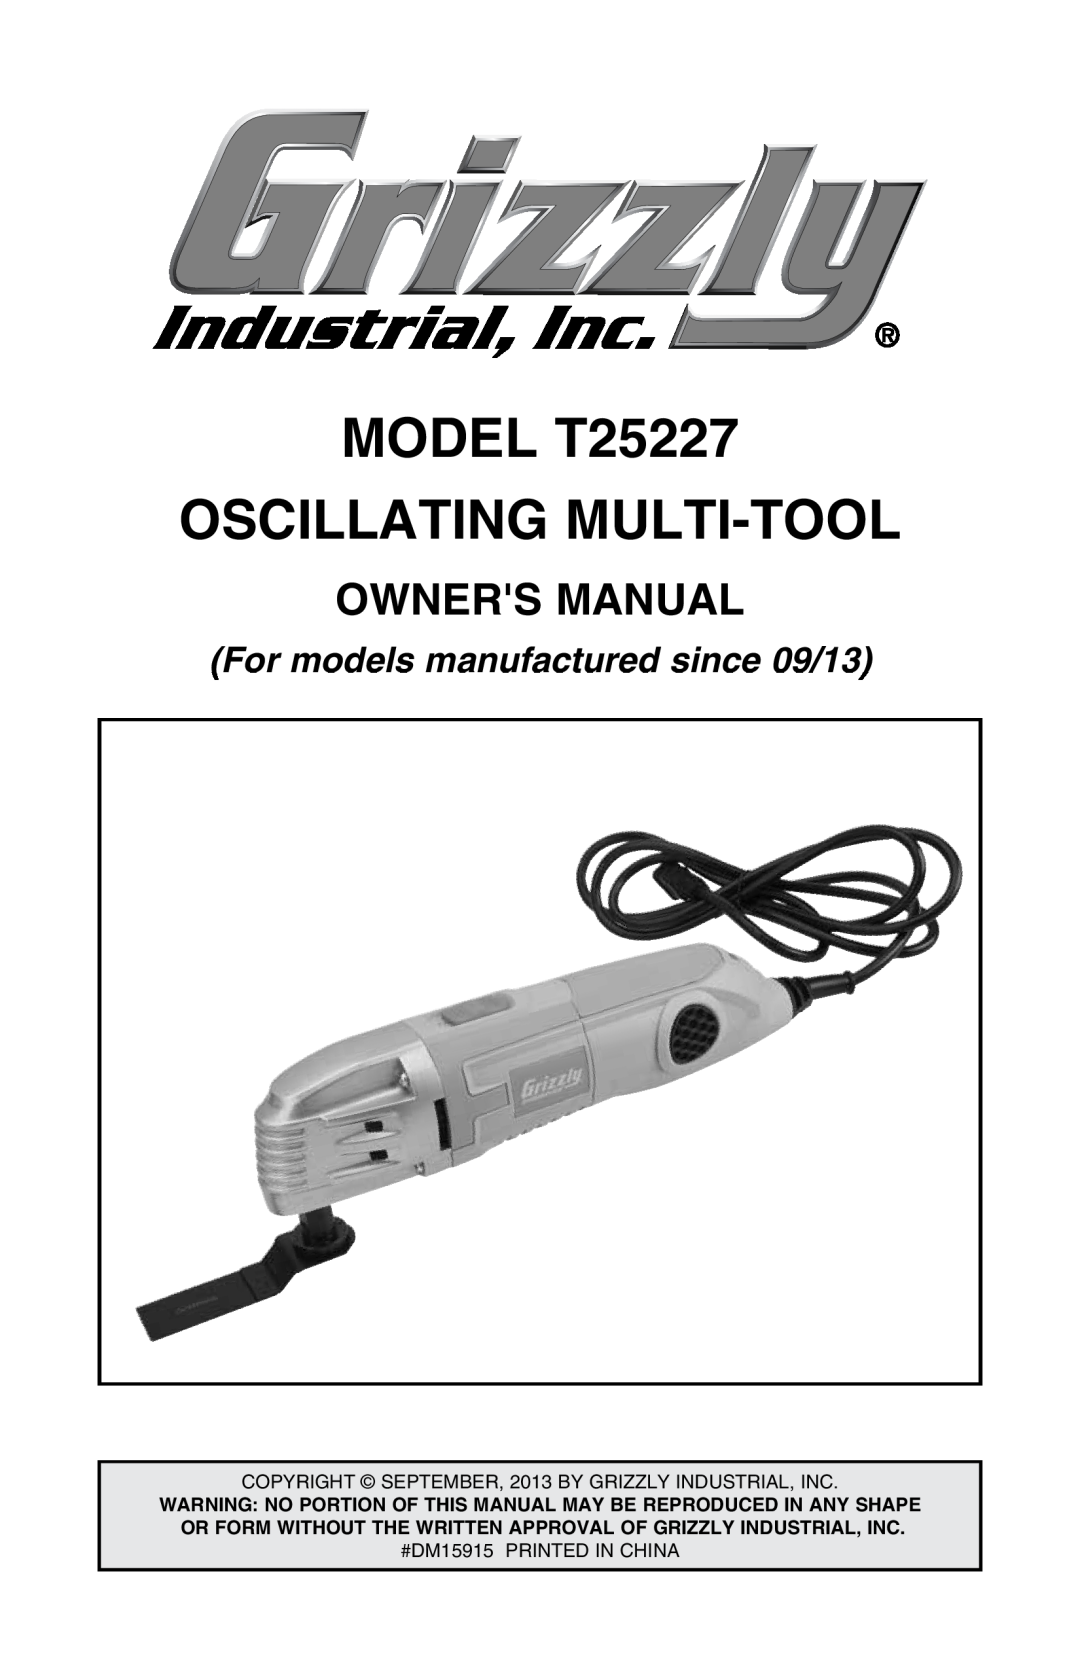 Grizzly owner manual MODEL T25227 oscillating multi-tool, For models manufactured since 09/13 